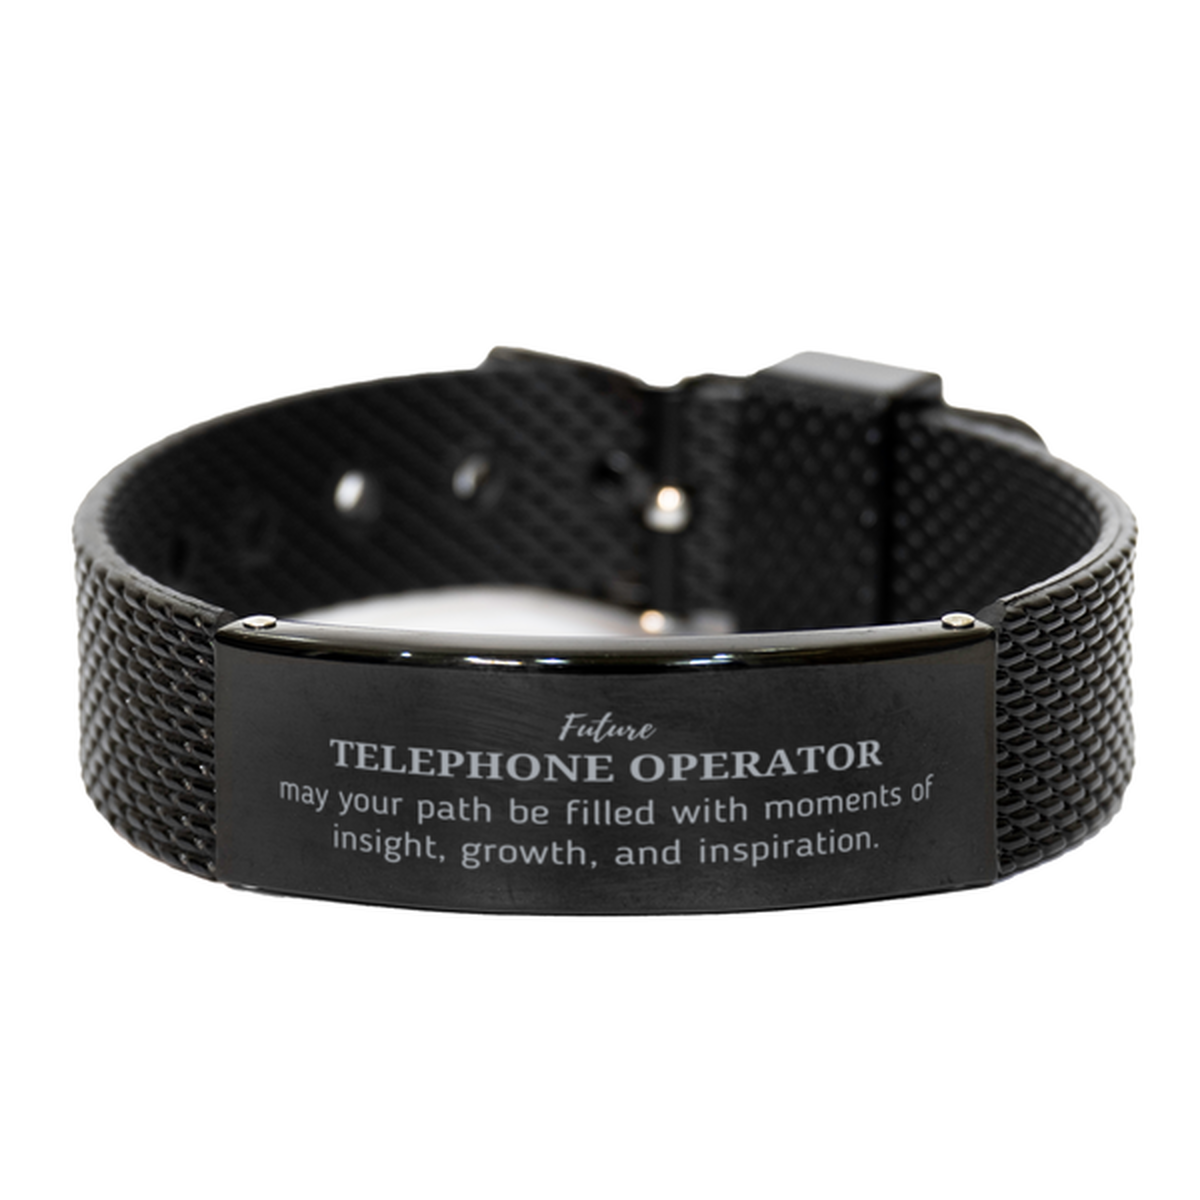 Future Telephone Operator Gifts, May your path be filled with moments of insight, Graduation Gifts for New Telephone Operator, Christmas Unique Black Shark Mesh Bracelet For Men, Women, Friends